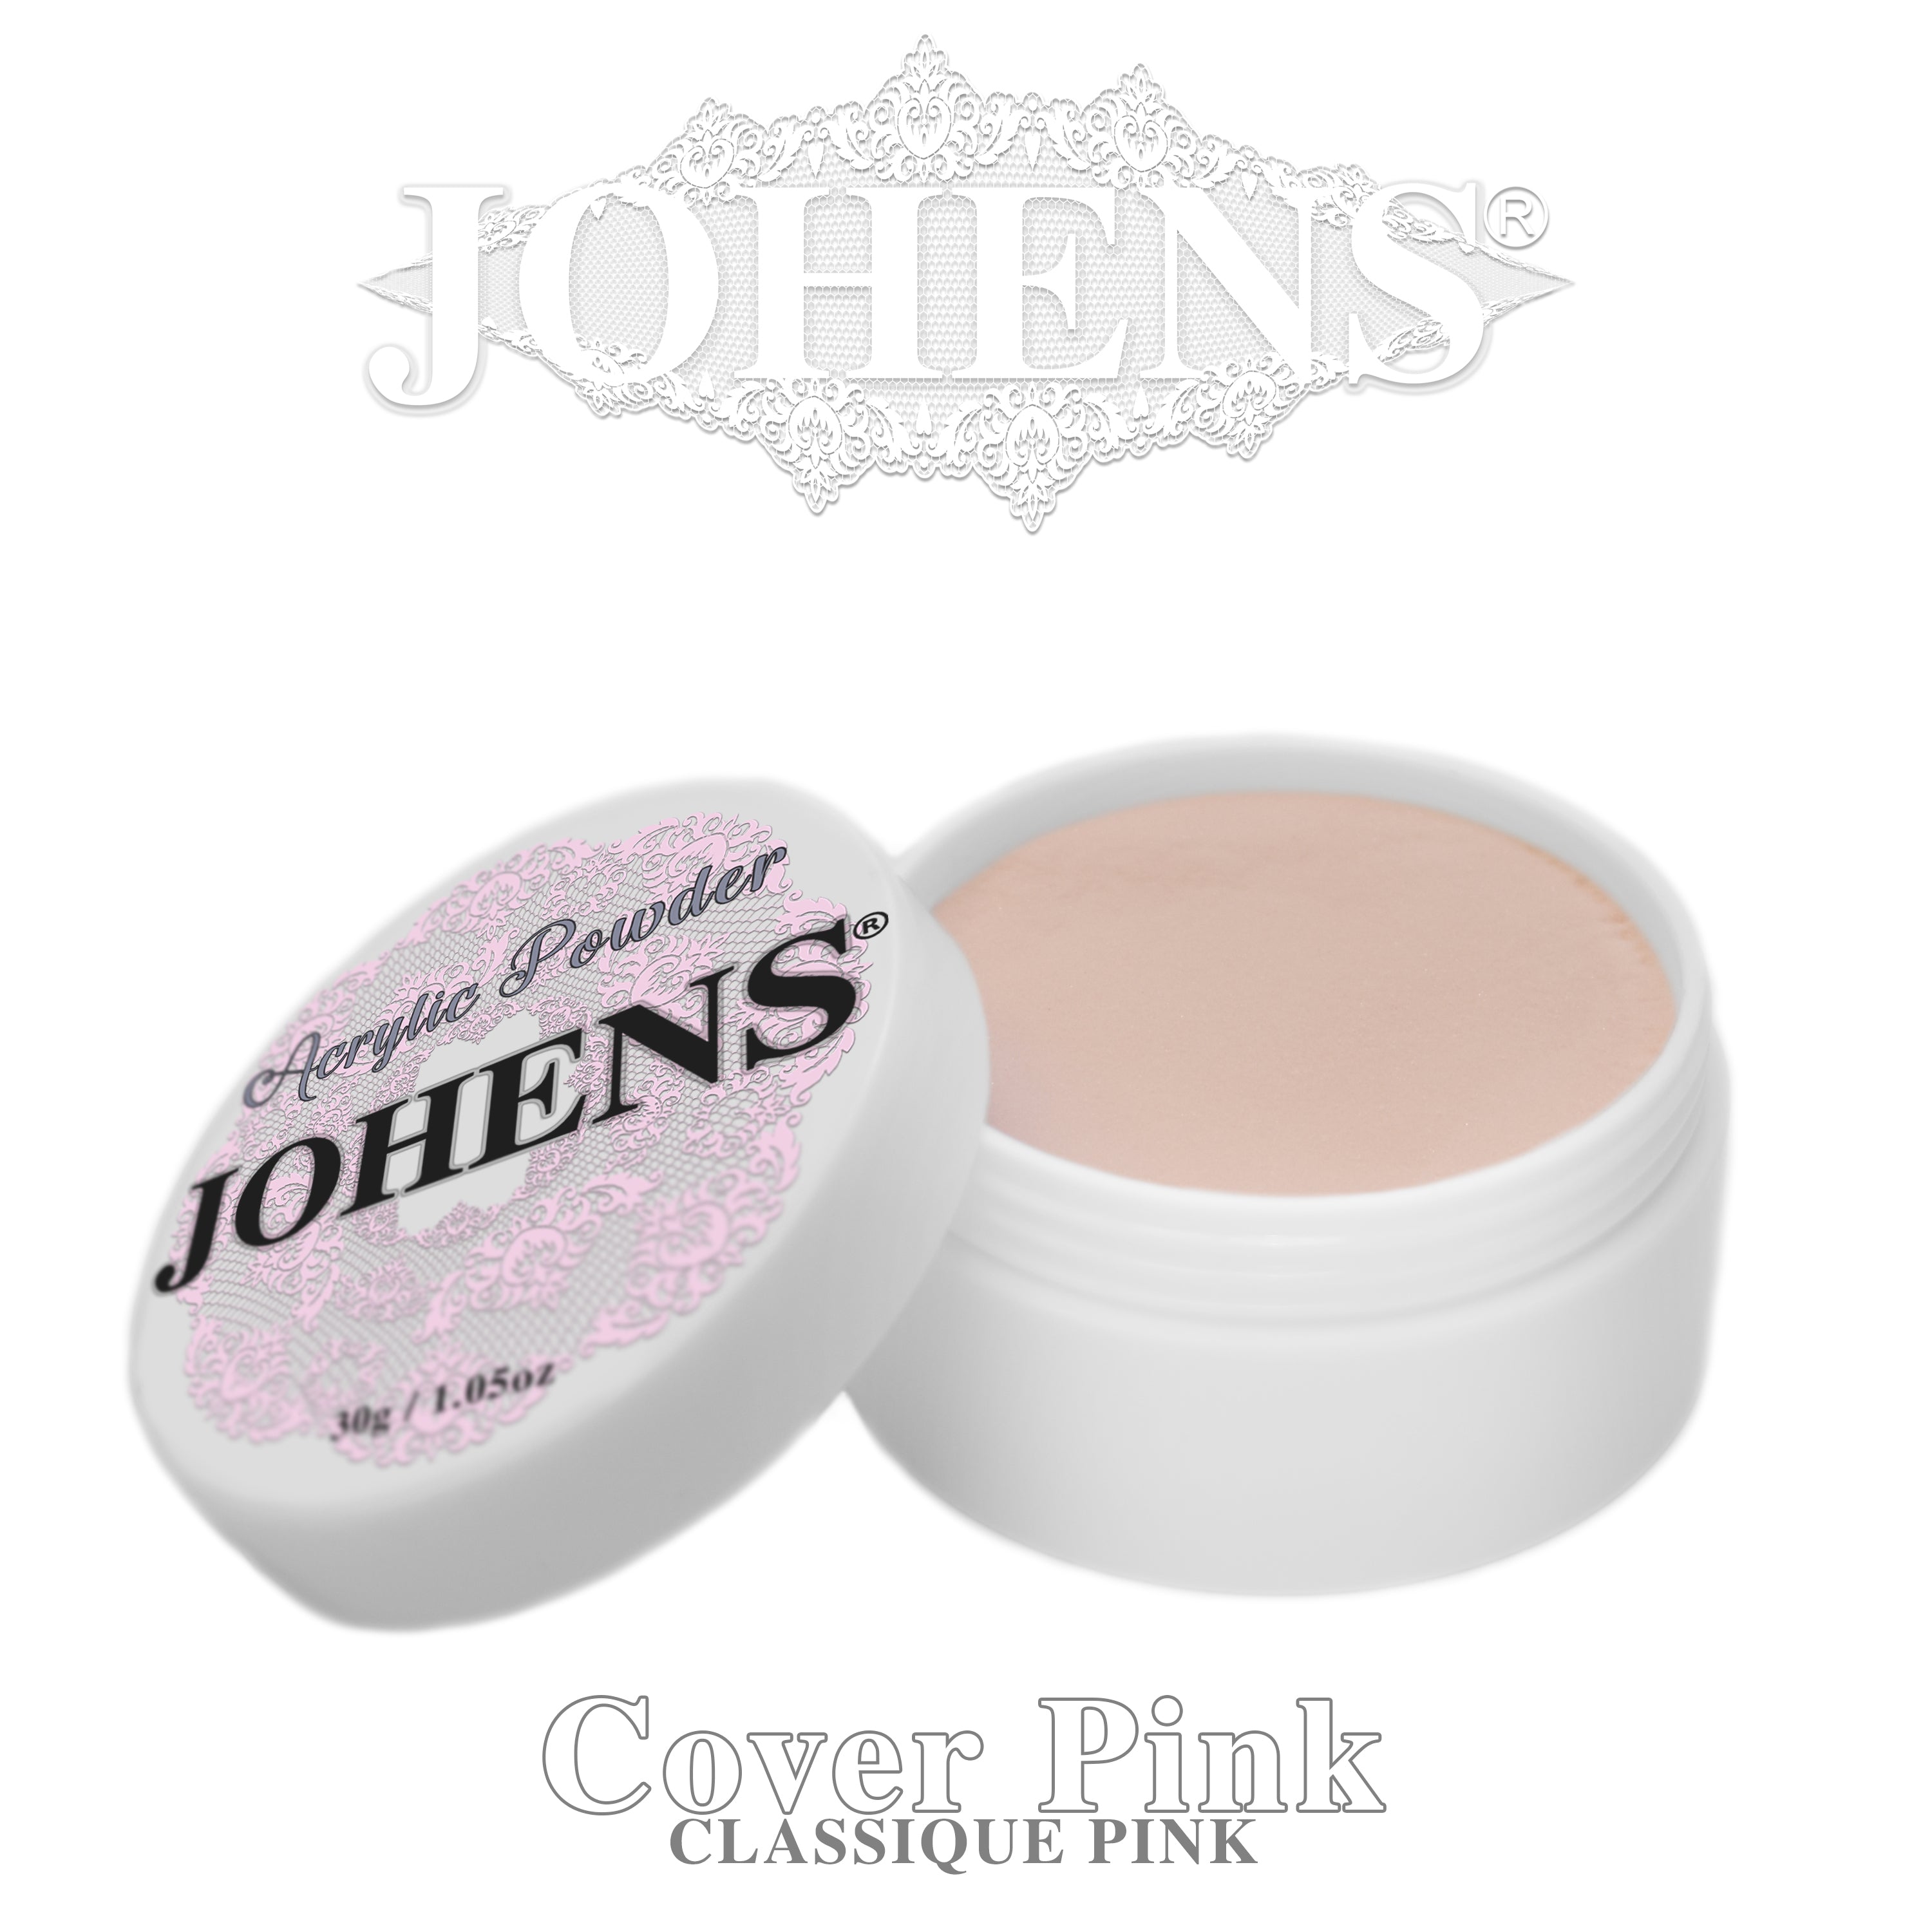 Acrylic Powder - Cover Pink - Classique Pink